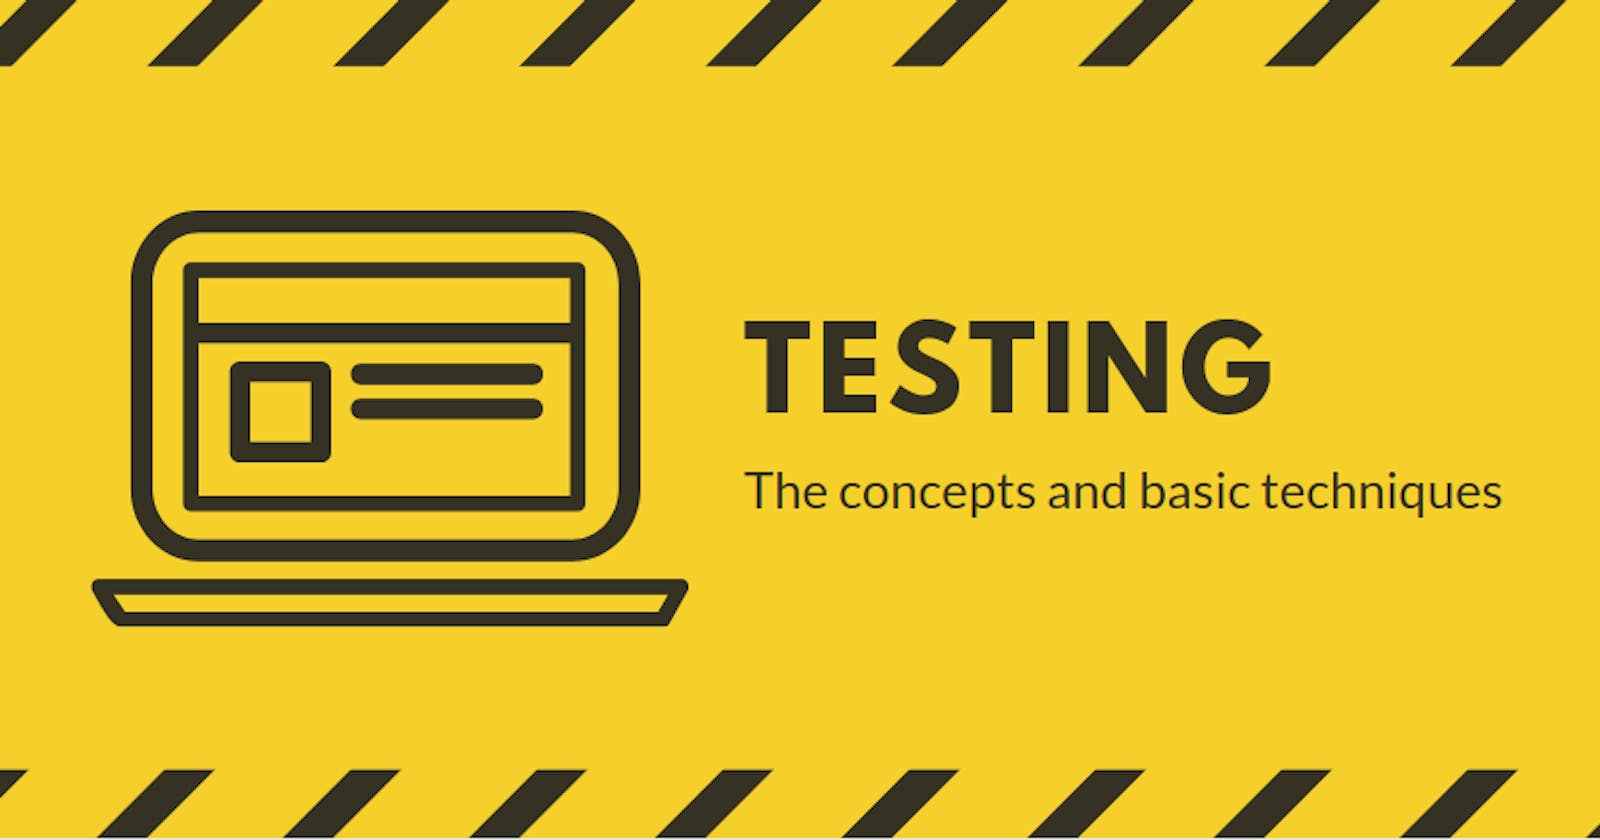 What is a test in software development?